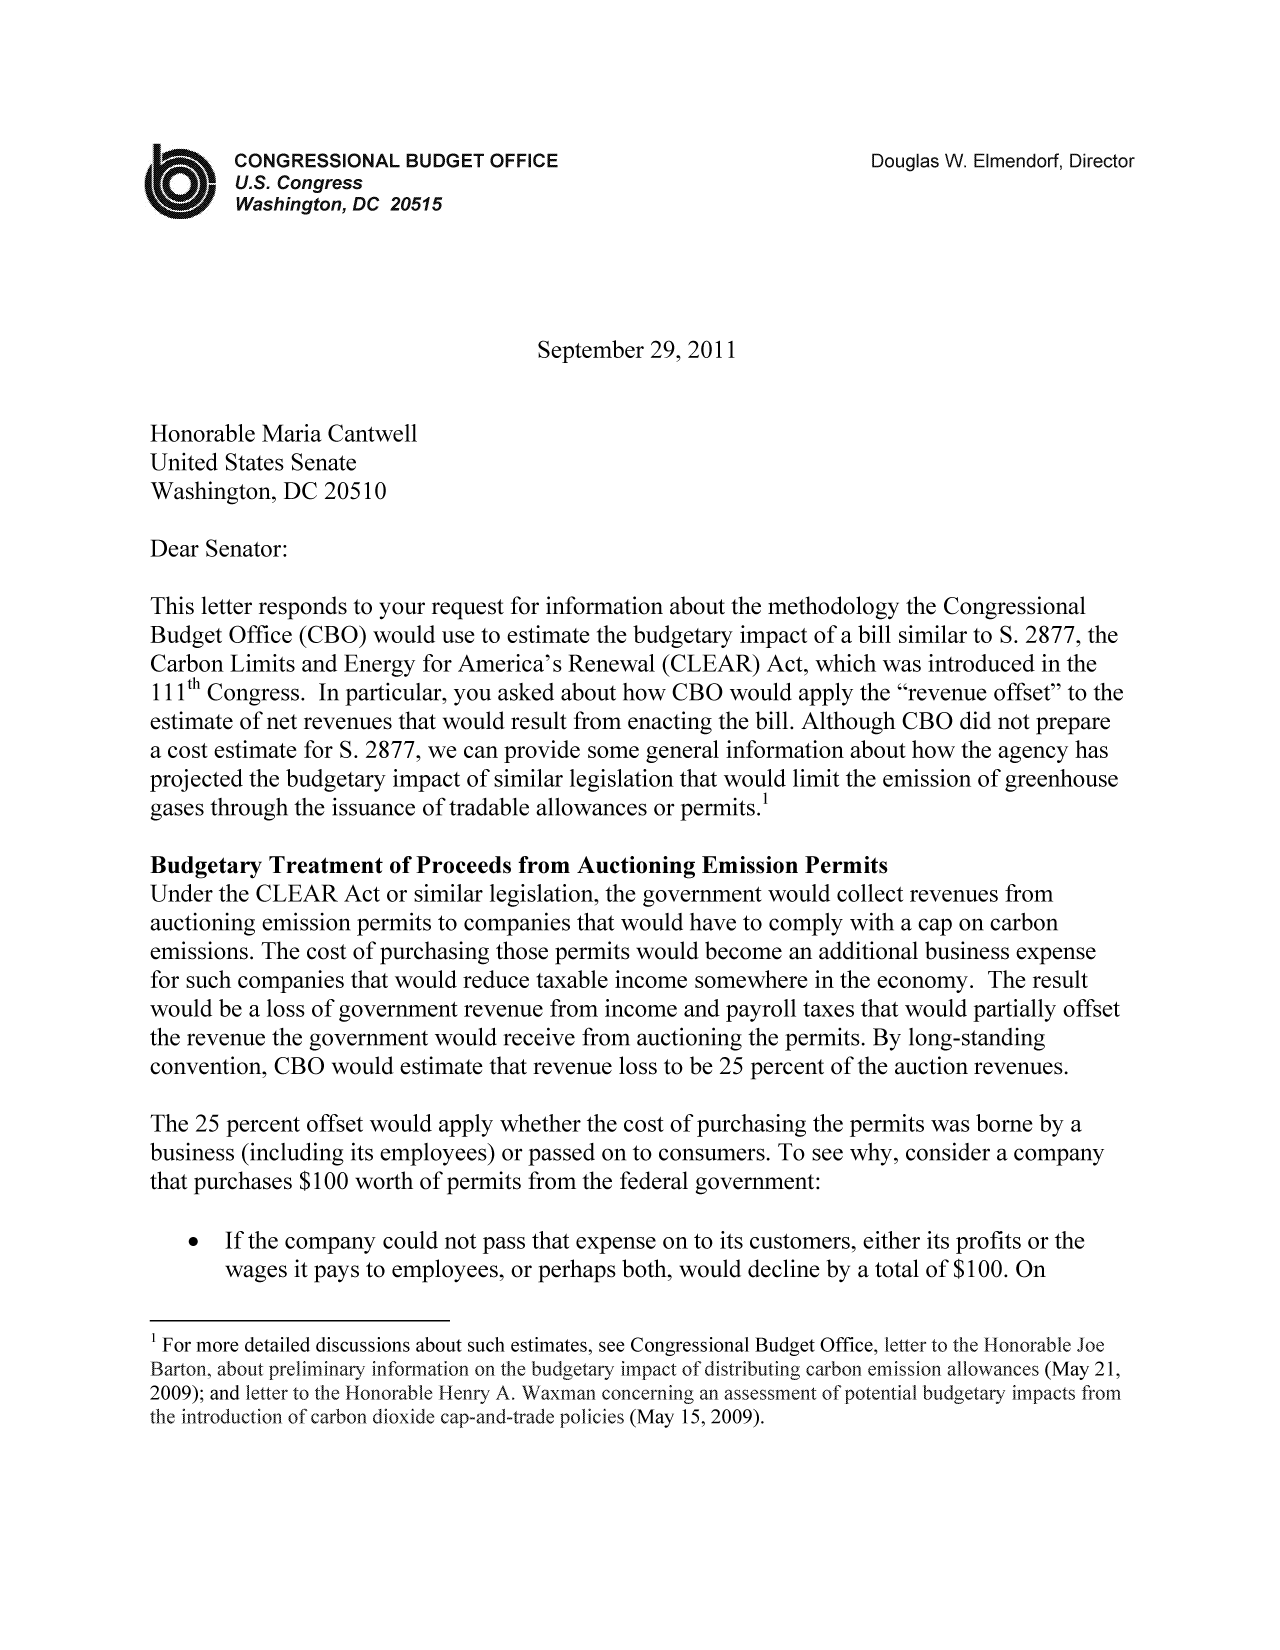 handle is hein.congrec/cbo10591 and id is 1 raw text is: CONGRESSIONAL BUDGET OFFICE                            Douglas W. Elmendorf, Director
U.S. Congress
Washington, DC 20515
September 29, 2011
Honorable Maria Cantwell
United States Senate
Washington, DC 20510
Dear Senator:
This letter responds to your request for information about the methodology the Congressional
Budget Office (CBO) would use to estimate the budgetary impact of a bill similar to S. 2877, the
Carbon Limits and Energy for America's Renewal (CLEAR) Act, which was introduced in the
111th Congress. In particular, you asked about how CBO would apply the revenue offset to the
estimate of net revenues that would result from enacting the bill. Although CBO did not prepare
a cost estimate for S. 2877, we can provide some general information about how the agency has
projected the budgetary impact of similar legislation that would limit the emission of greenhouse
gases through the issuance of tradable allowances or permits.
Budgetary Treatment of Proceeds from Auctioning Emission Permits
Under the CLEAR Act or similar legislation, the government would collect revenues from
auctioning emission permits to companies that would have to comply with a cap on carbon
emissions. The cost of purchasing those permits would become an additional business expense
for such companies that would reduce taxable income somewhere in the economy. The result
would be a loss of government revenue from income and payroll taxes that would partially offset
the revenue the government would receive from auctioning the permits. By long-standing
convention, CBO would estimate that revenue loss to be 25 percent of the auction revenues.
The 25 percent offset would apply whether the cost of purchasing the permits was borne by a
business (including its employees) or passed on to consumers. To see why, consider a company
that purchases $100 worth of permits from the federal government:
* If the company could not pass that expense on to its customers, either its profits or the
wages it pays to employees, or perhaps both, would decline by a total of $100. On
1 For more detailed discussions about such estimates, see Congressional Budget Office, letter to~ the H onorable Joe
Barton, abou t preliminary information on the budgetary impact of distributing carbon~ emission allowlances (May 21,
2009); and letter to the Honorable H enry A. Waxman concerning an assessment of potential budgetary impacts from
the introduction of carbon dioxide cap-and-trade policies (May 15, 2009).


